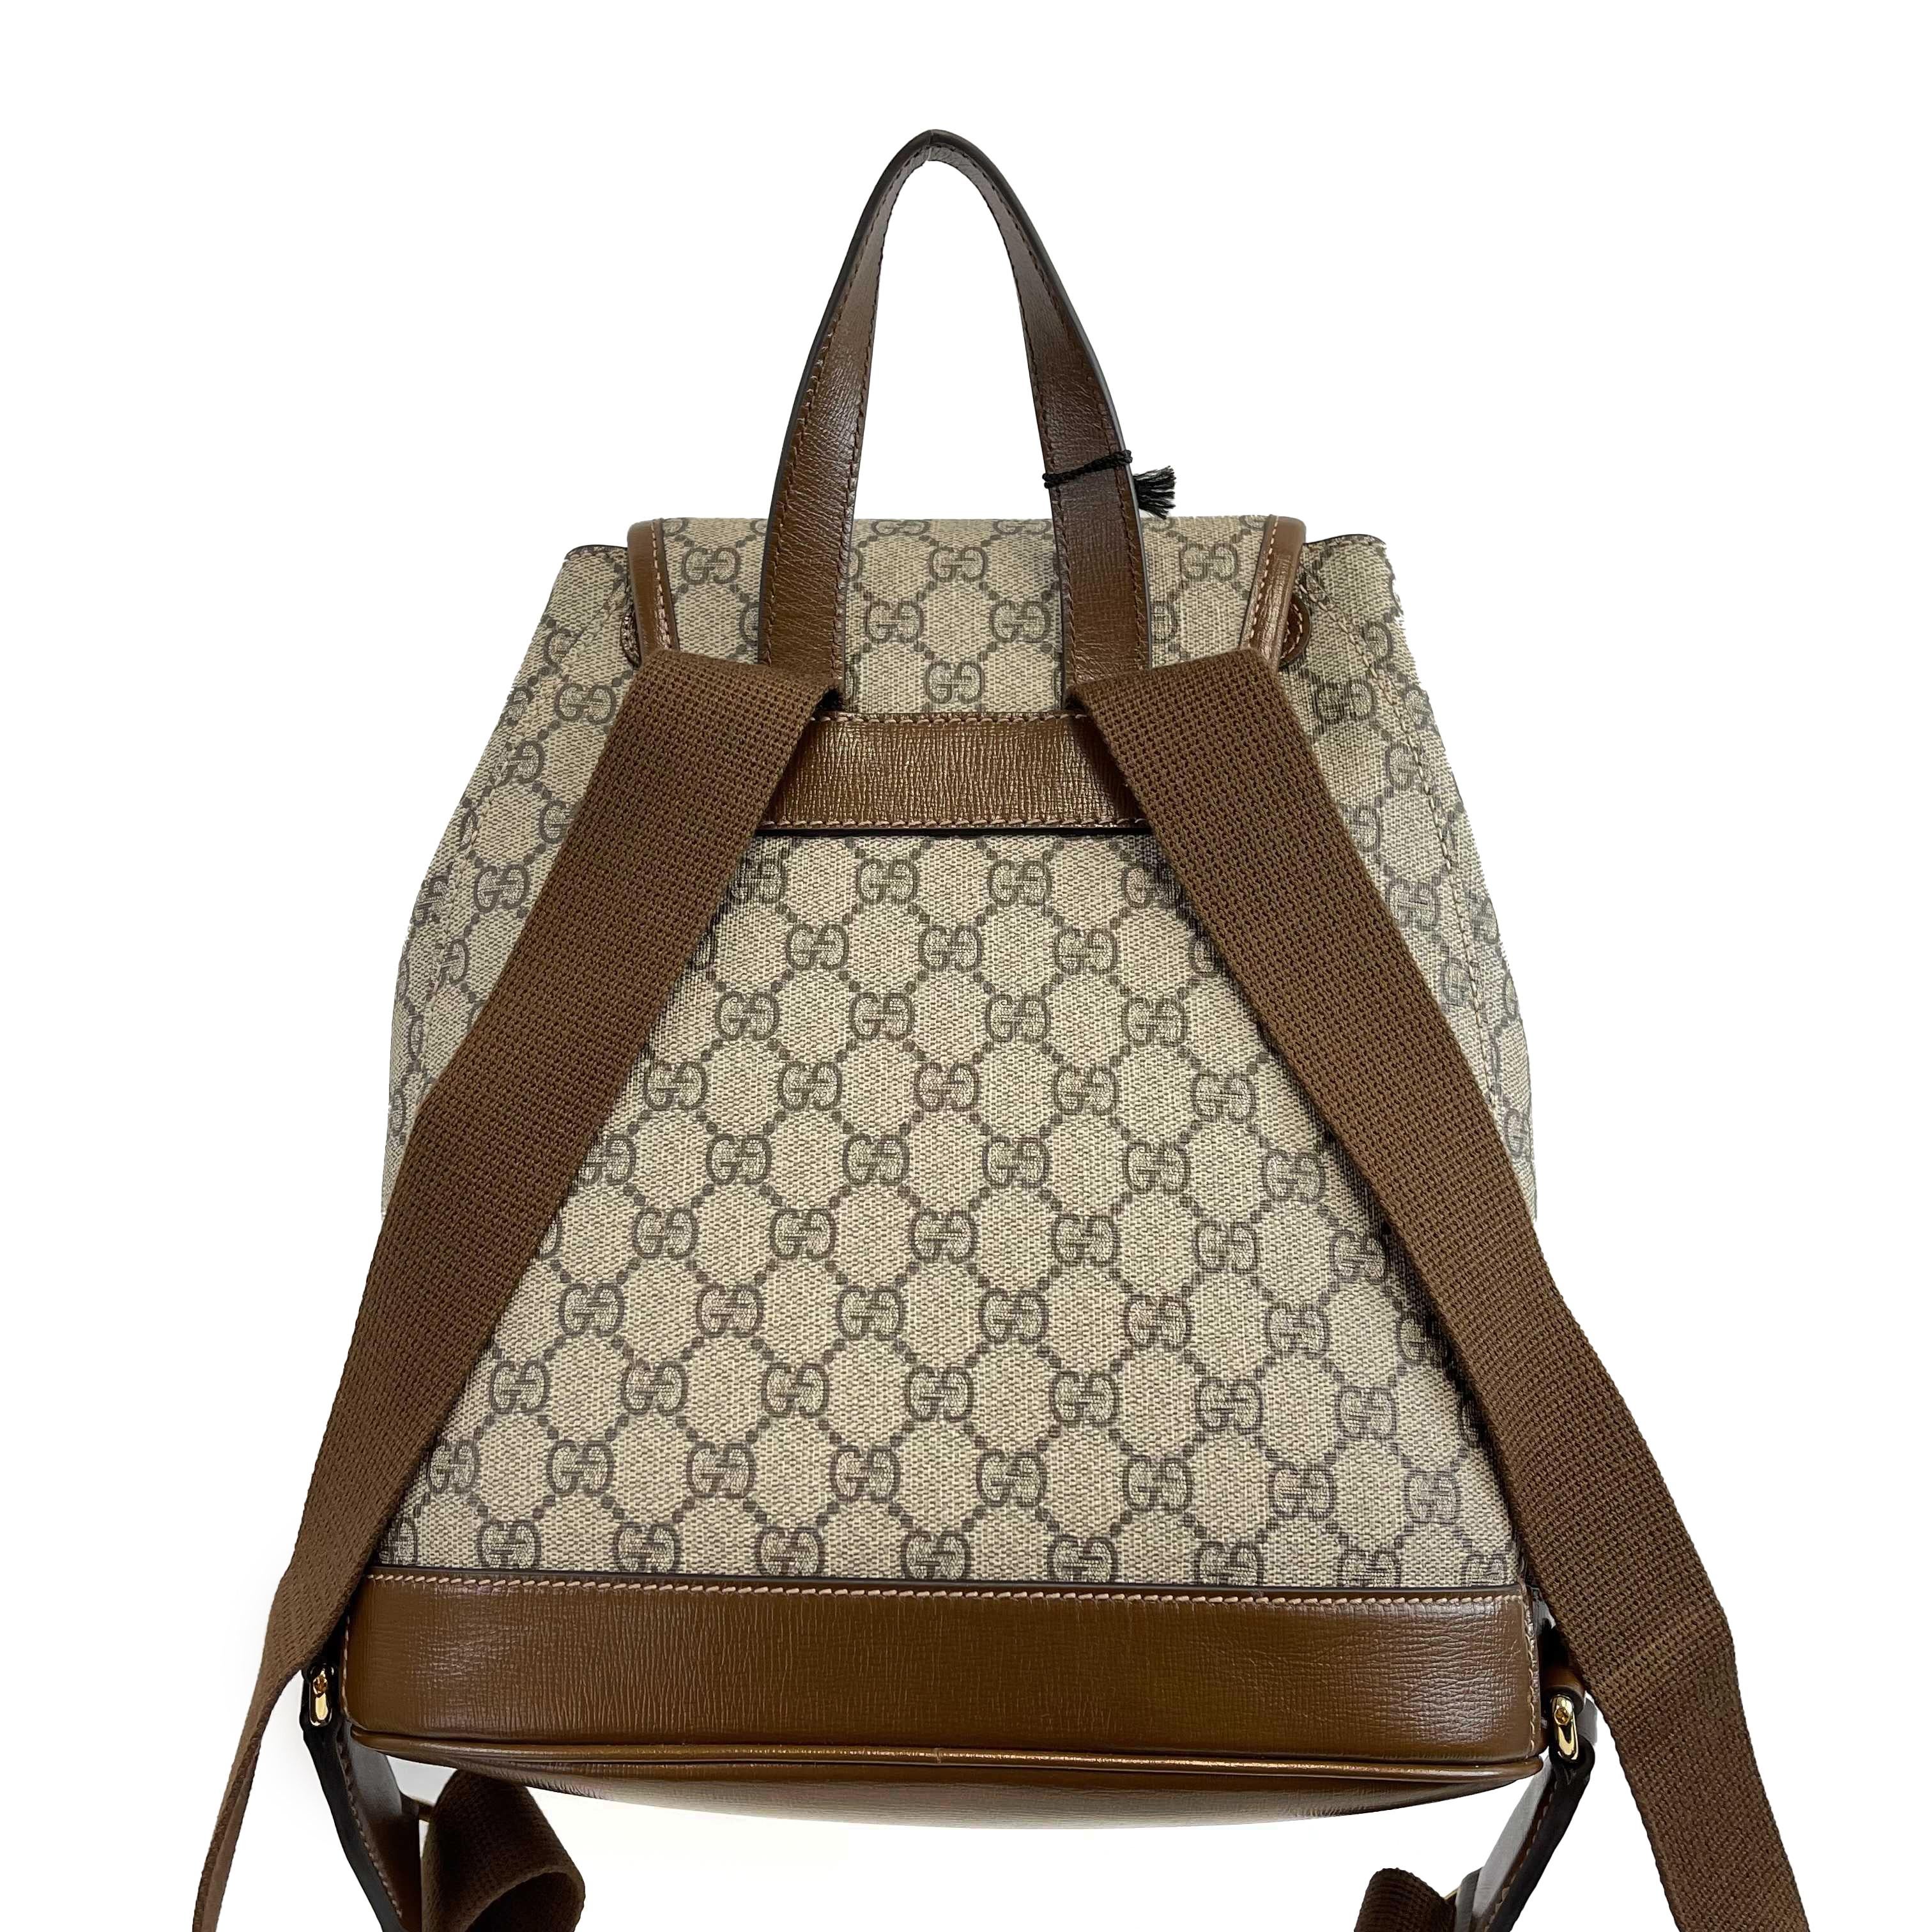 Gucci - NEW Backpack With Interlocking G - Beige / Brown Monogram Backpack

DESCRIPTION

Beige and ebony GG Supreme canvas
Brown leather details
Brown leather top handle
Gold hardware
Oval leather Interlocking G tag
Cotton linen interior
1 interior